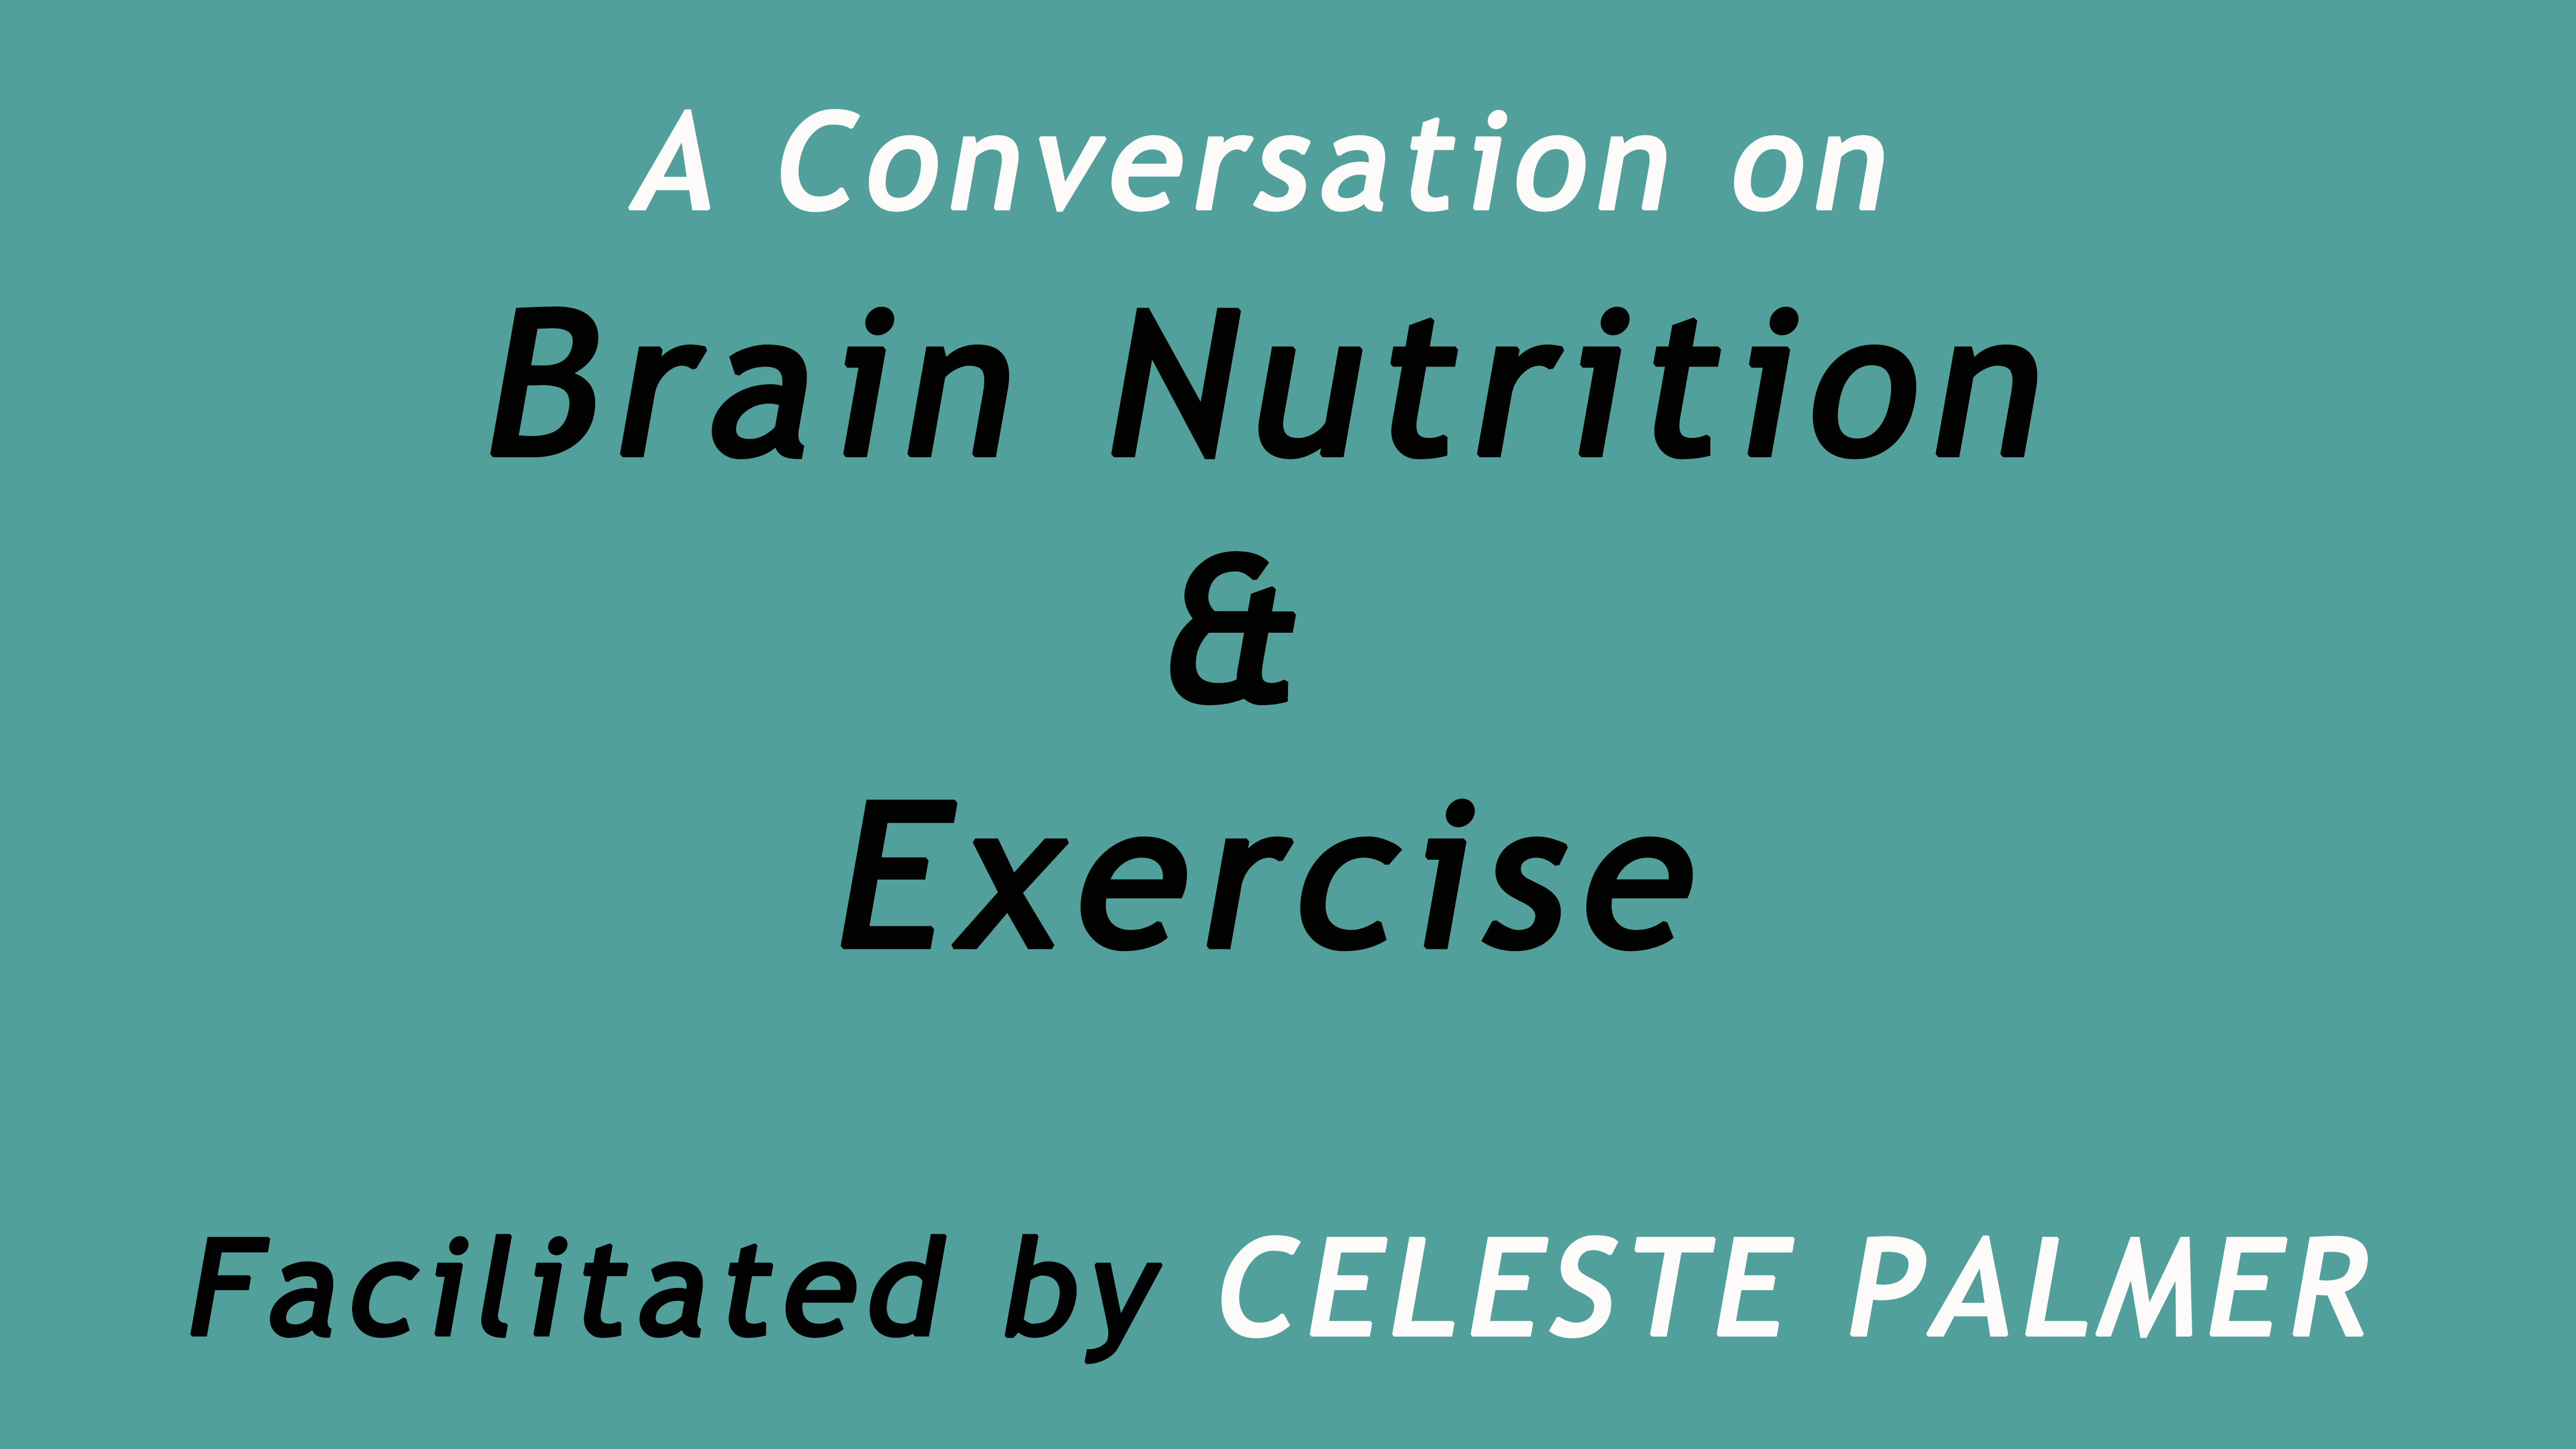 A conversation on Brain Nutrition and Exercise, facilitated by Celeste Palmer